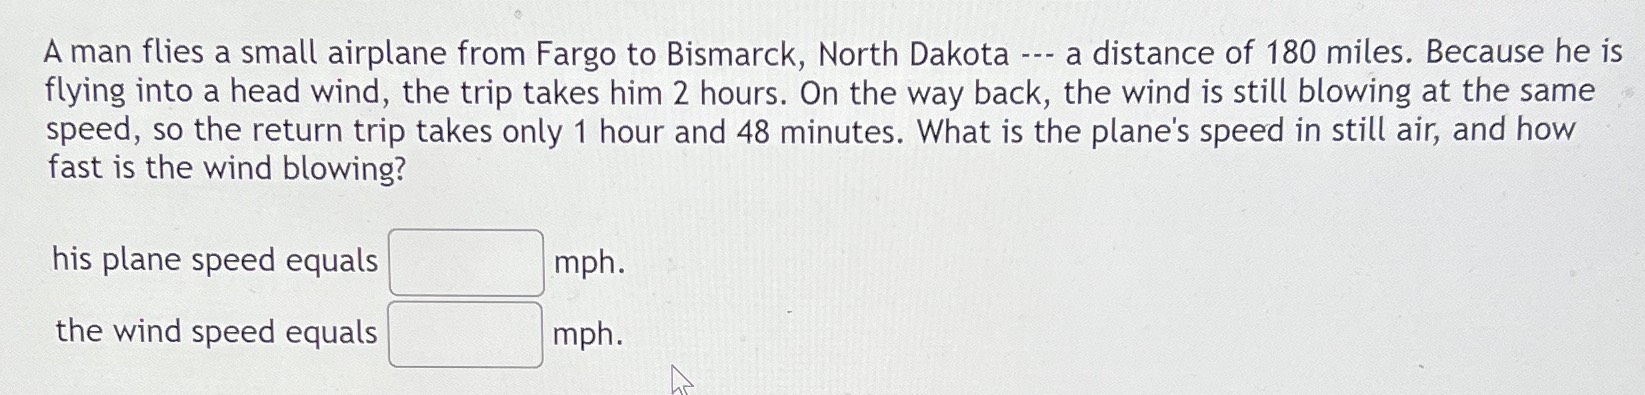 A man flies a small airplane from Fargo to Bismarc...